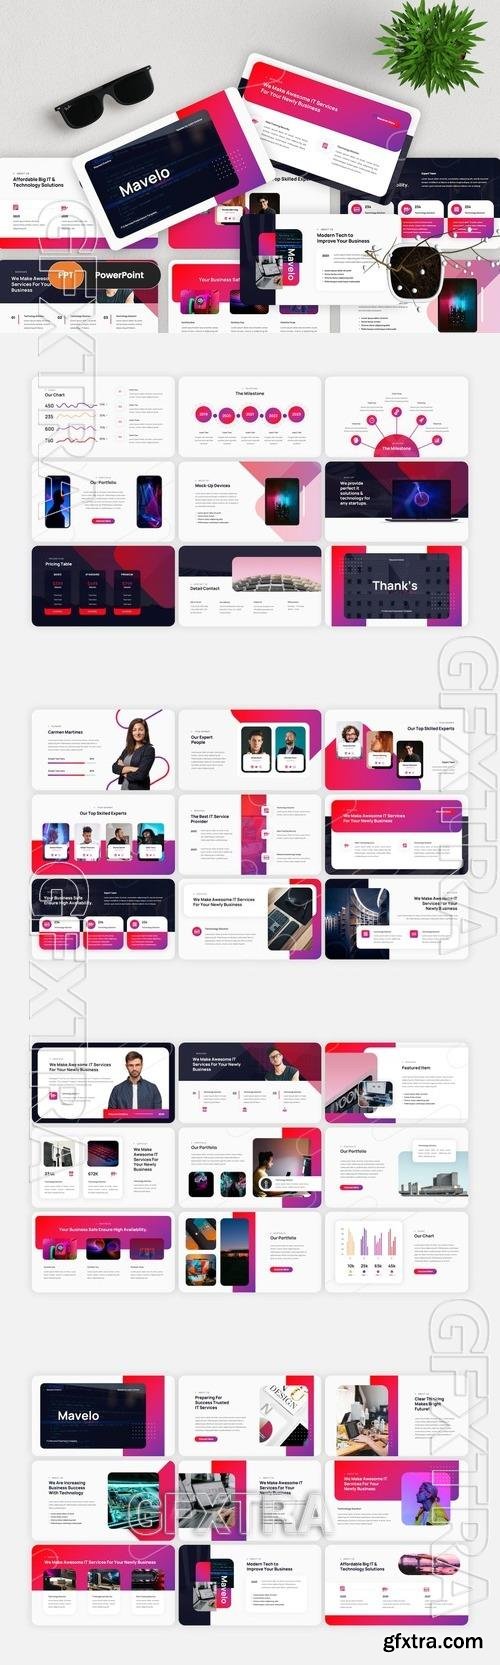 Mavelo - IT Technology PowerPoint Template NGVFWCM